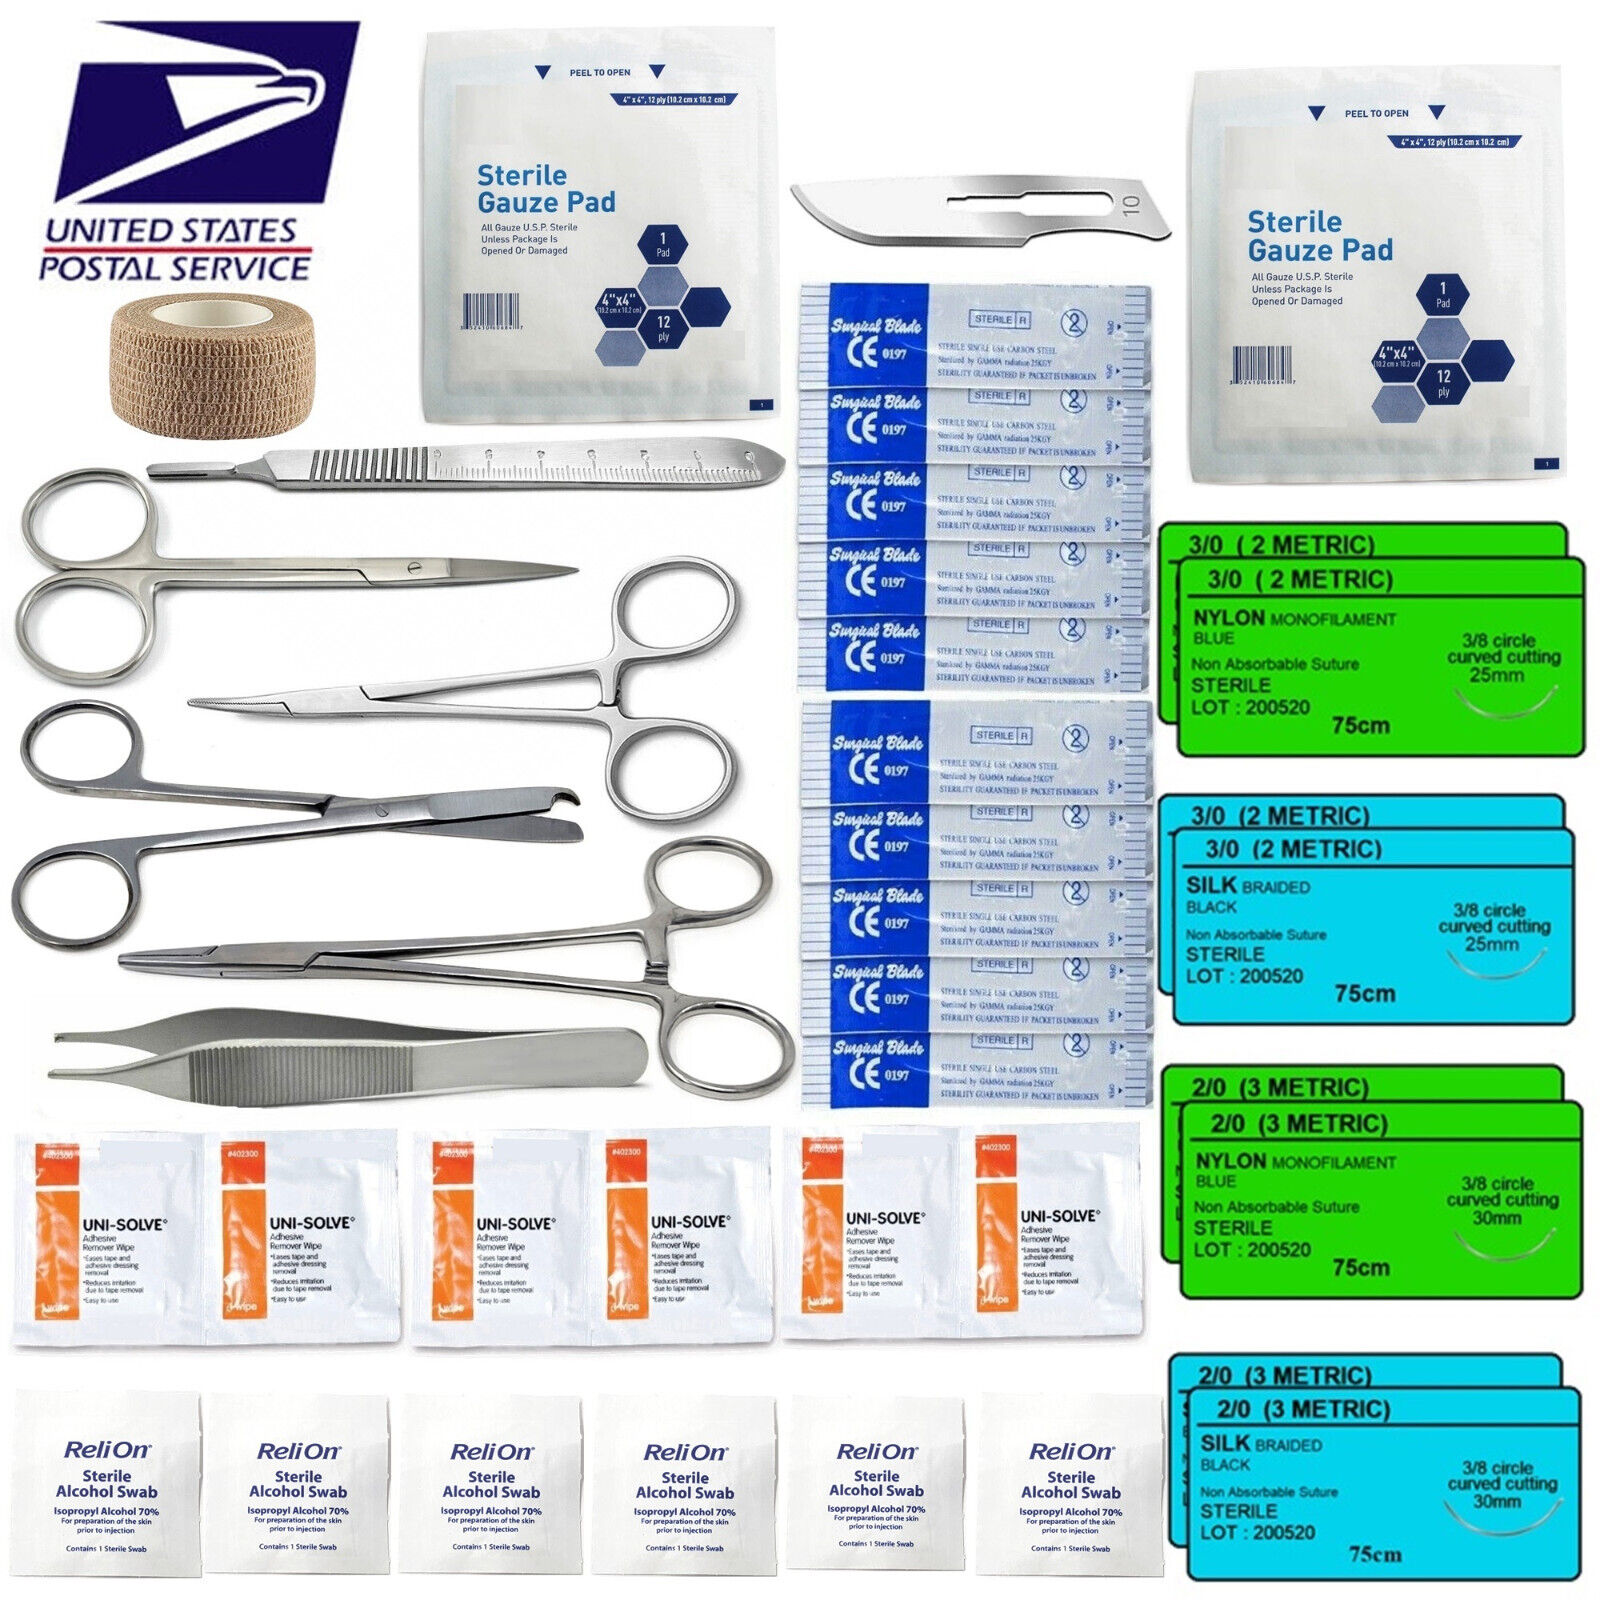 Surgical Suture Kit Basic First Aid Medical Travel Kit - 39 Pieces USA MADE !! Unbranded 39 Pcs Kit - фотография #2